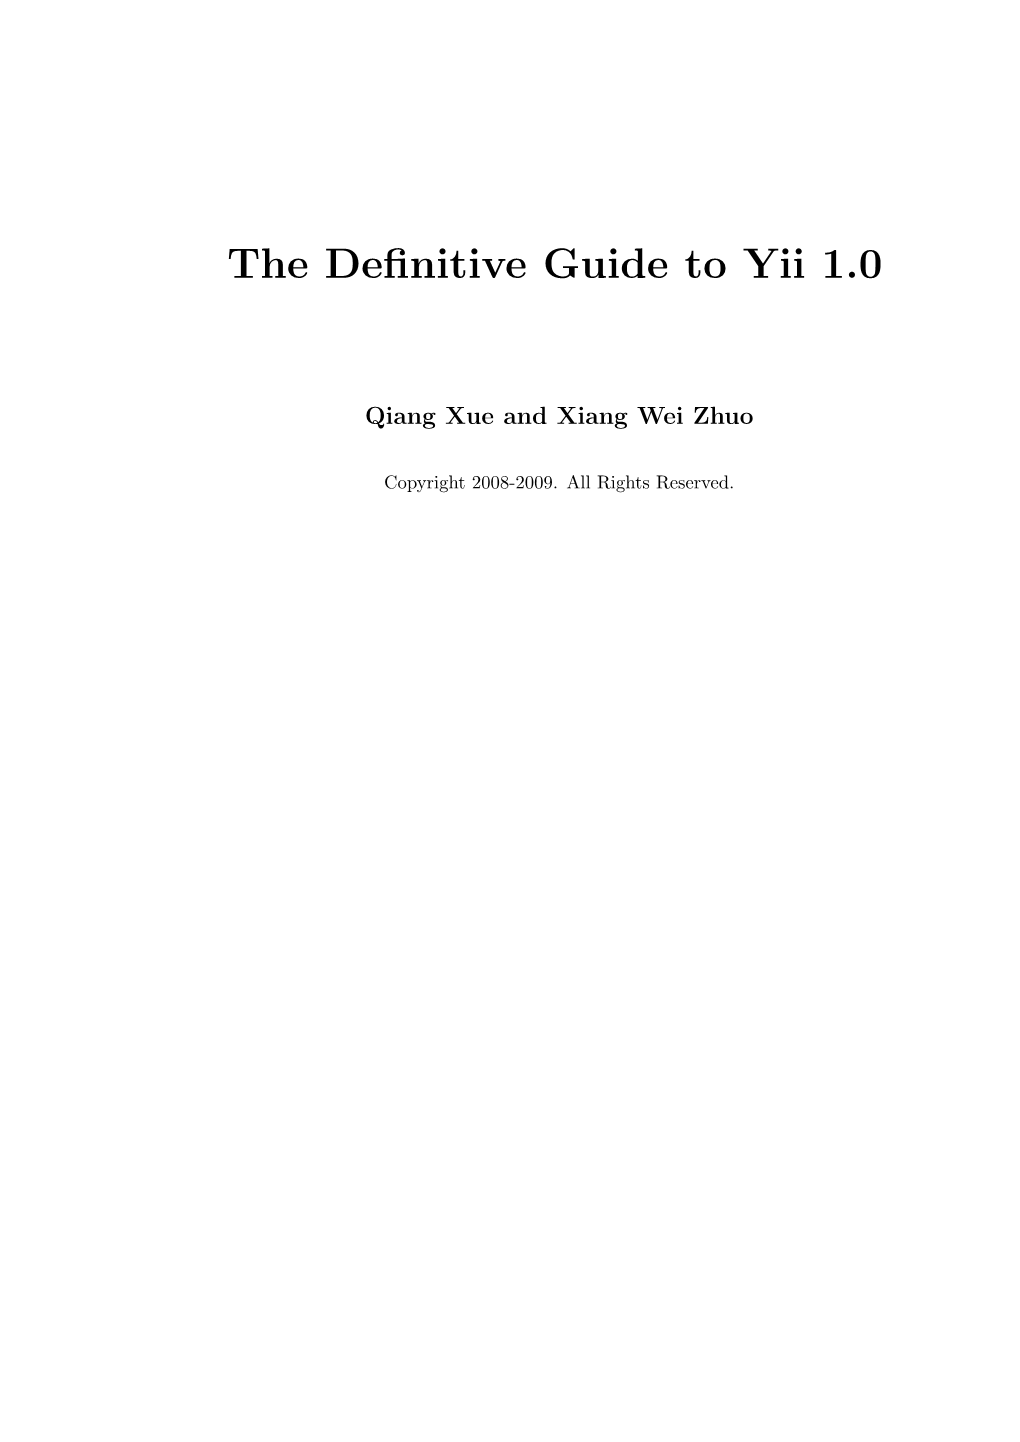 The Definitive Guide to Yii